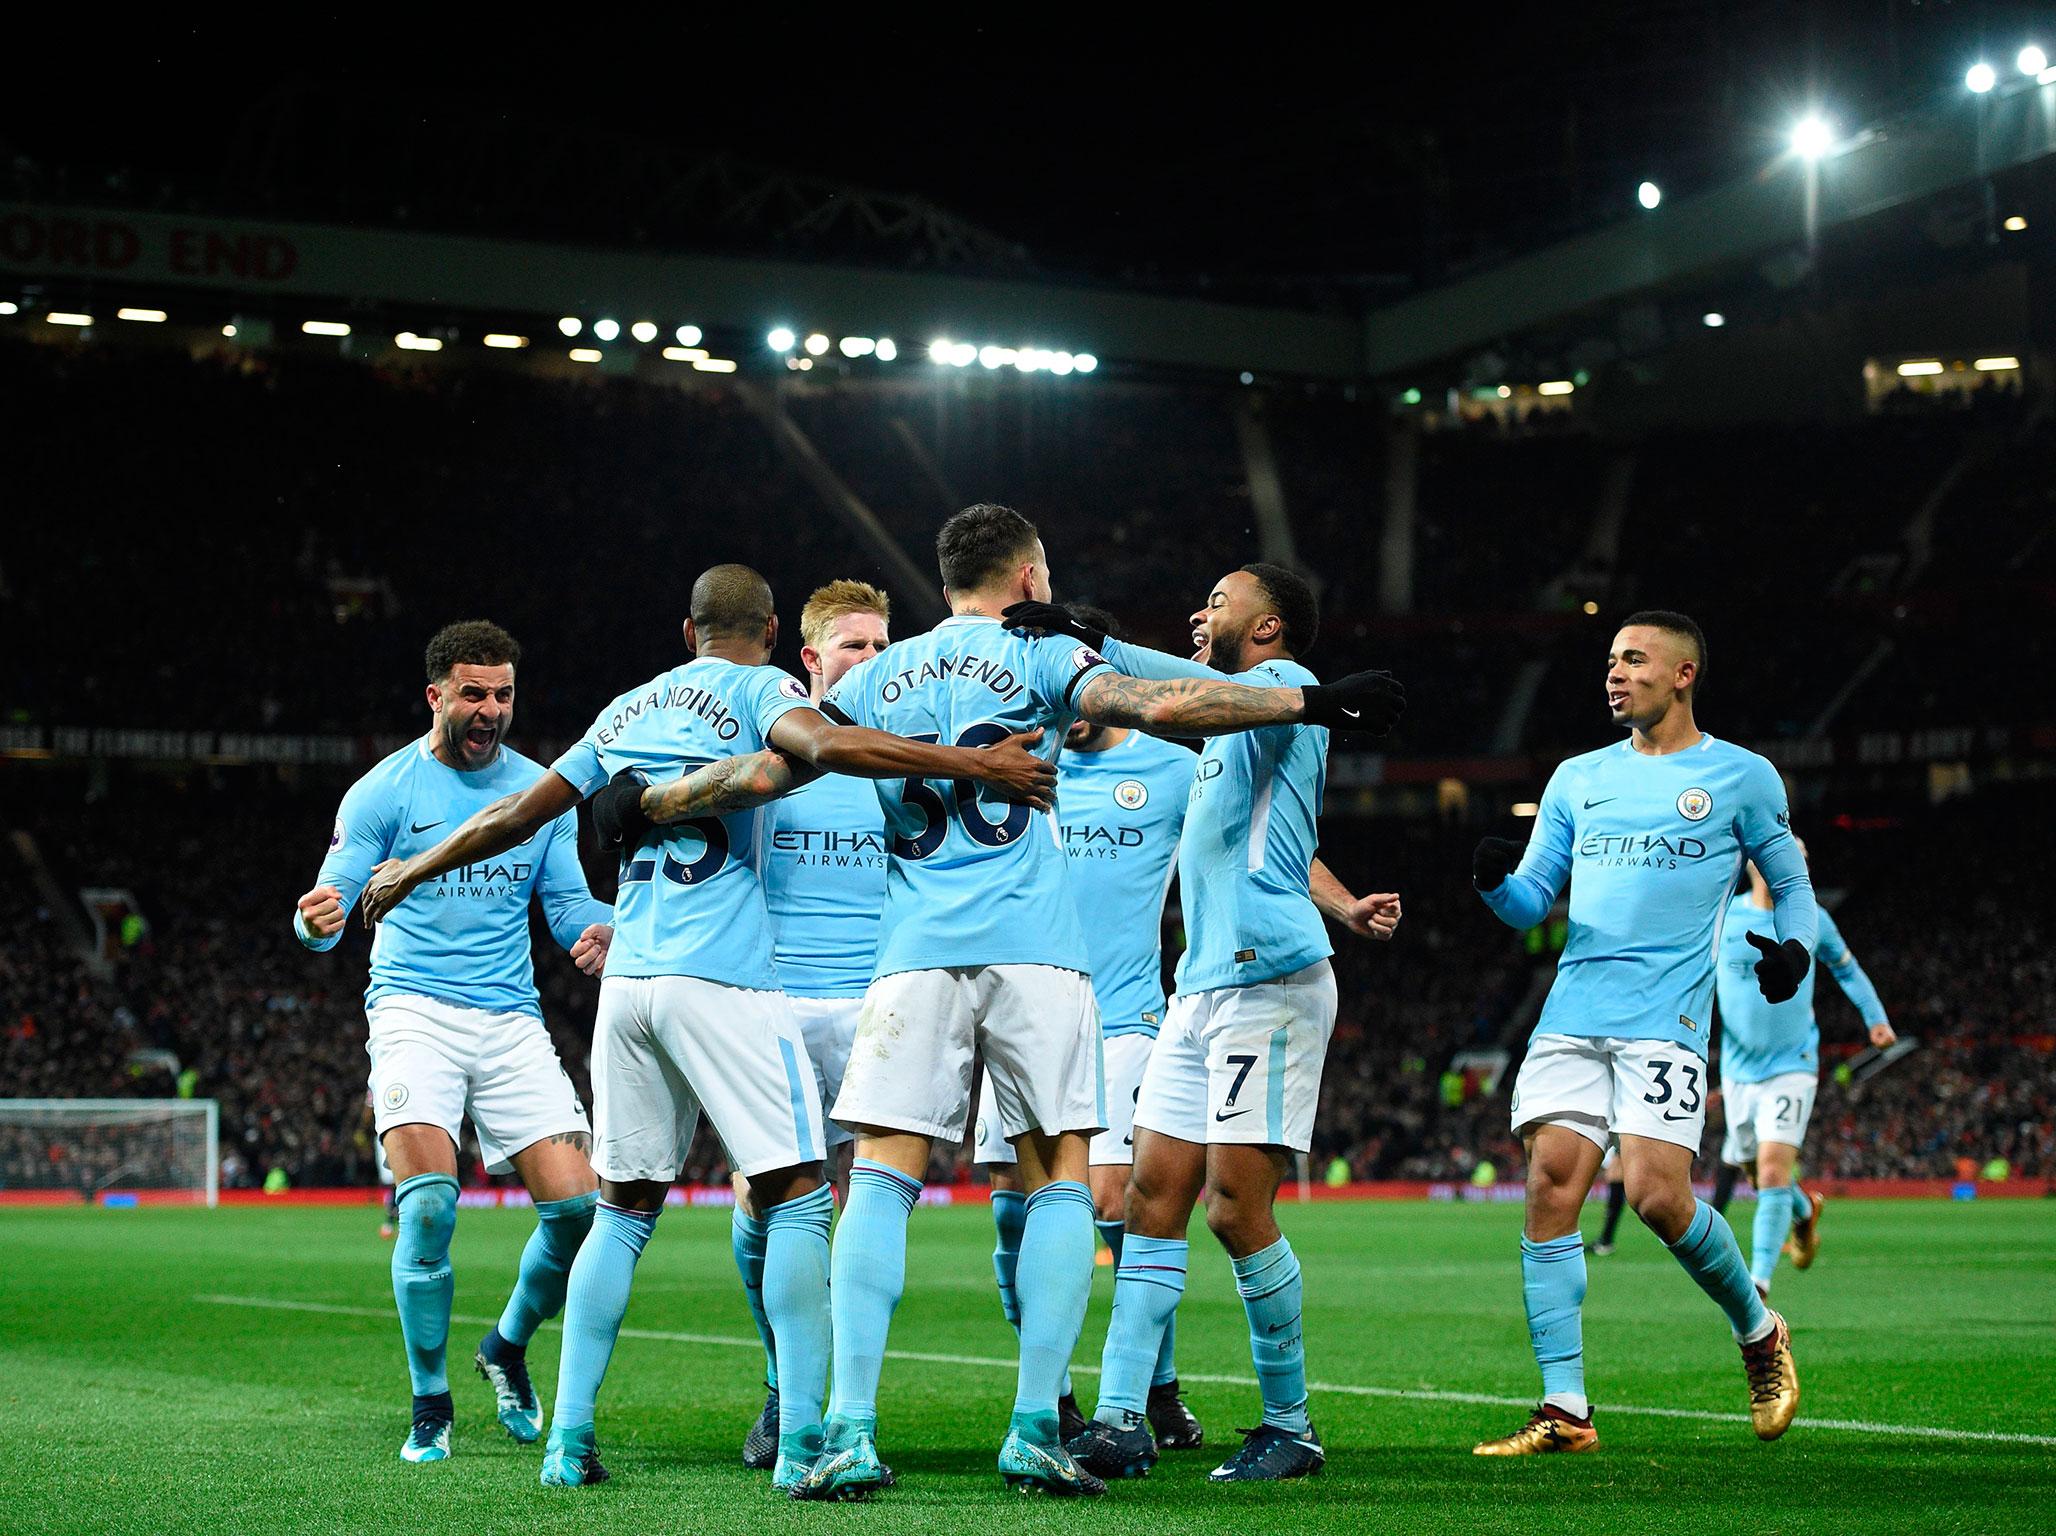 Manchester City moved 11 points clear of United after a deserved win at Old Trafford